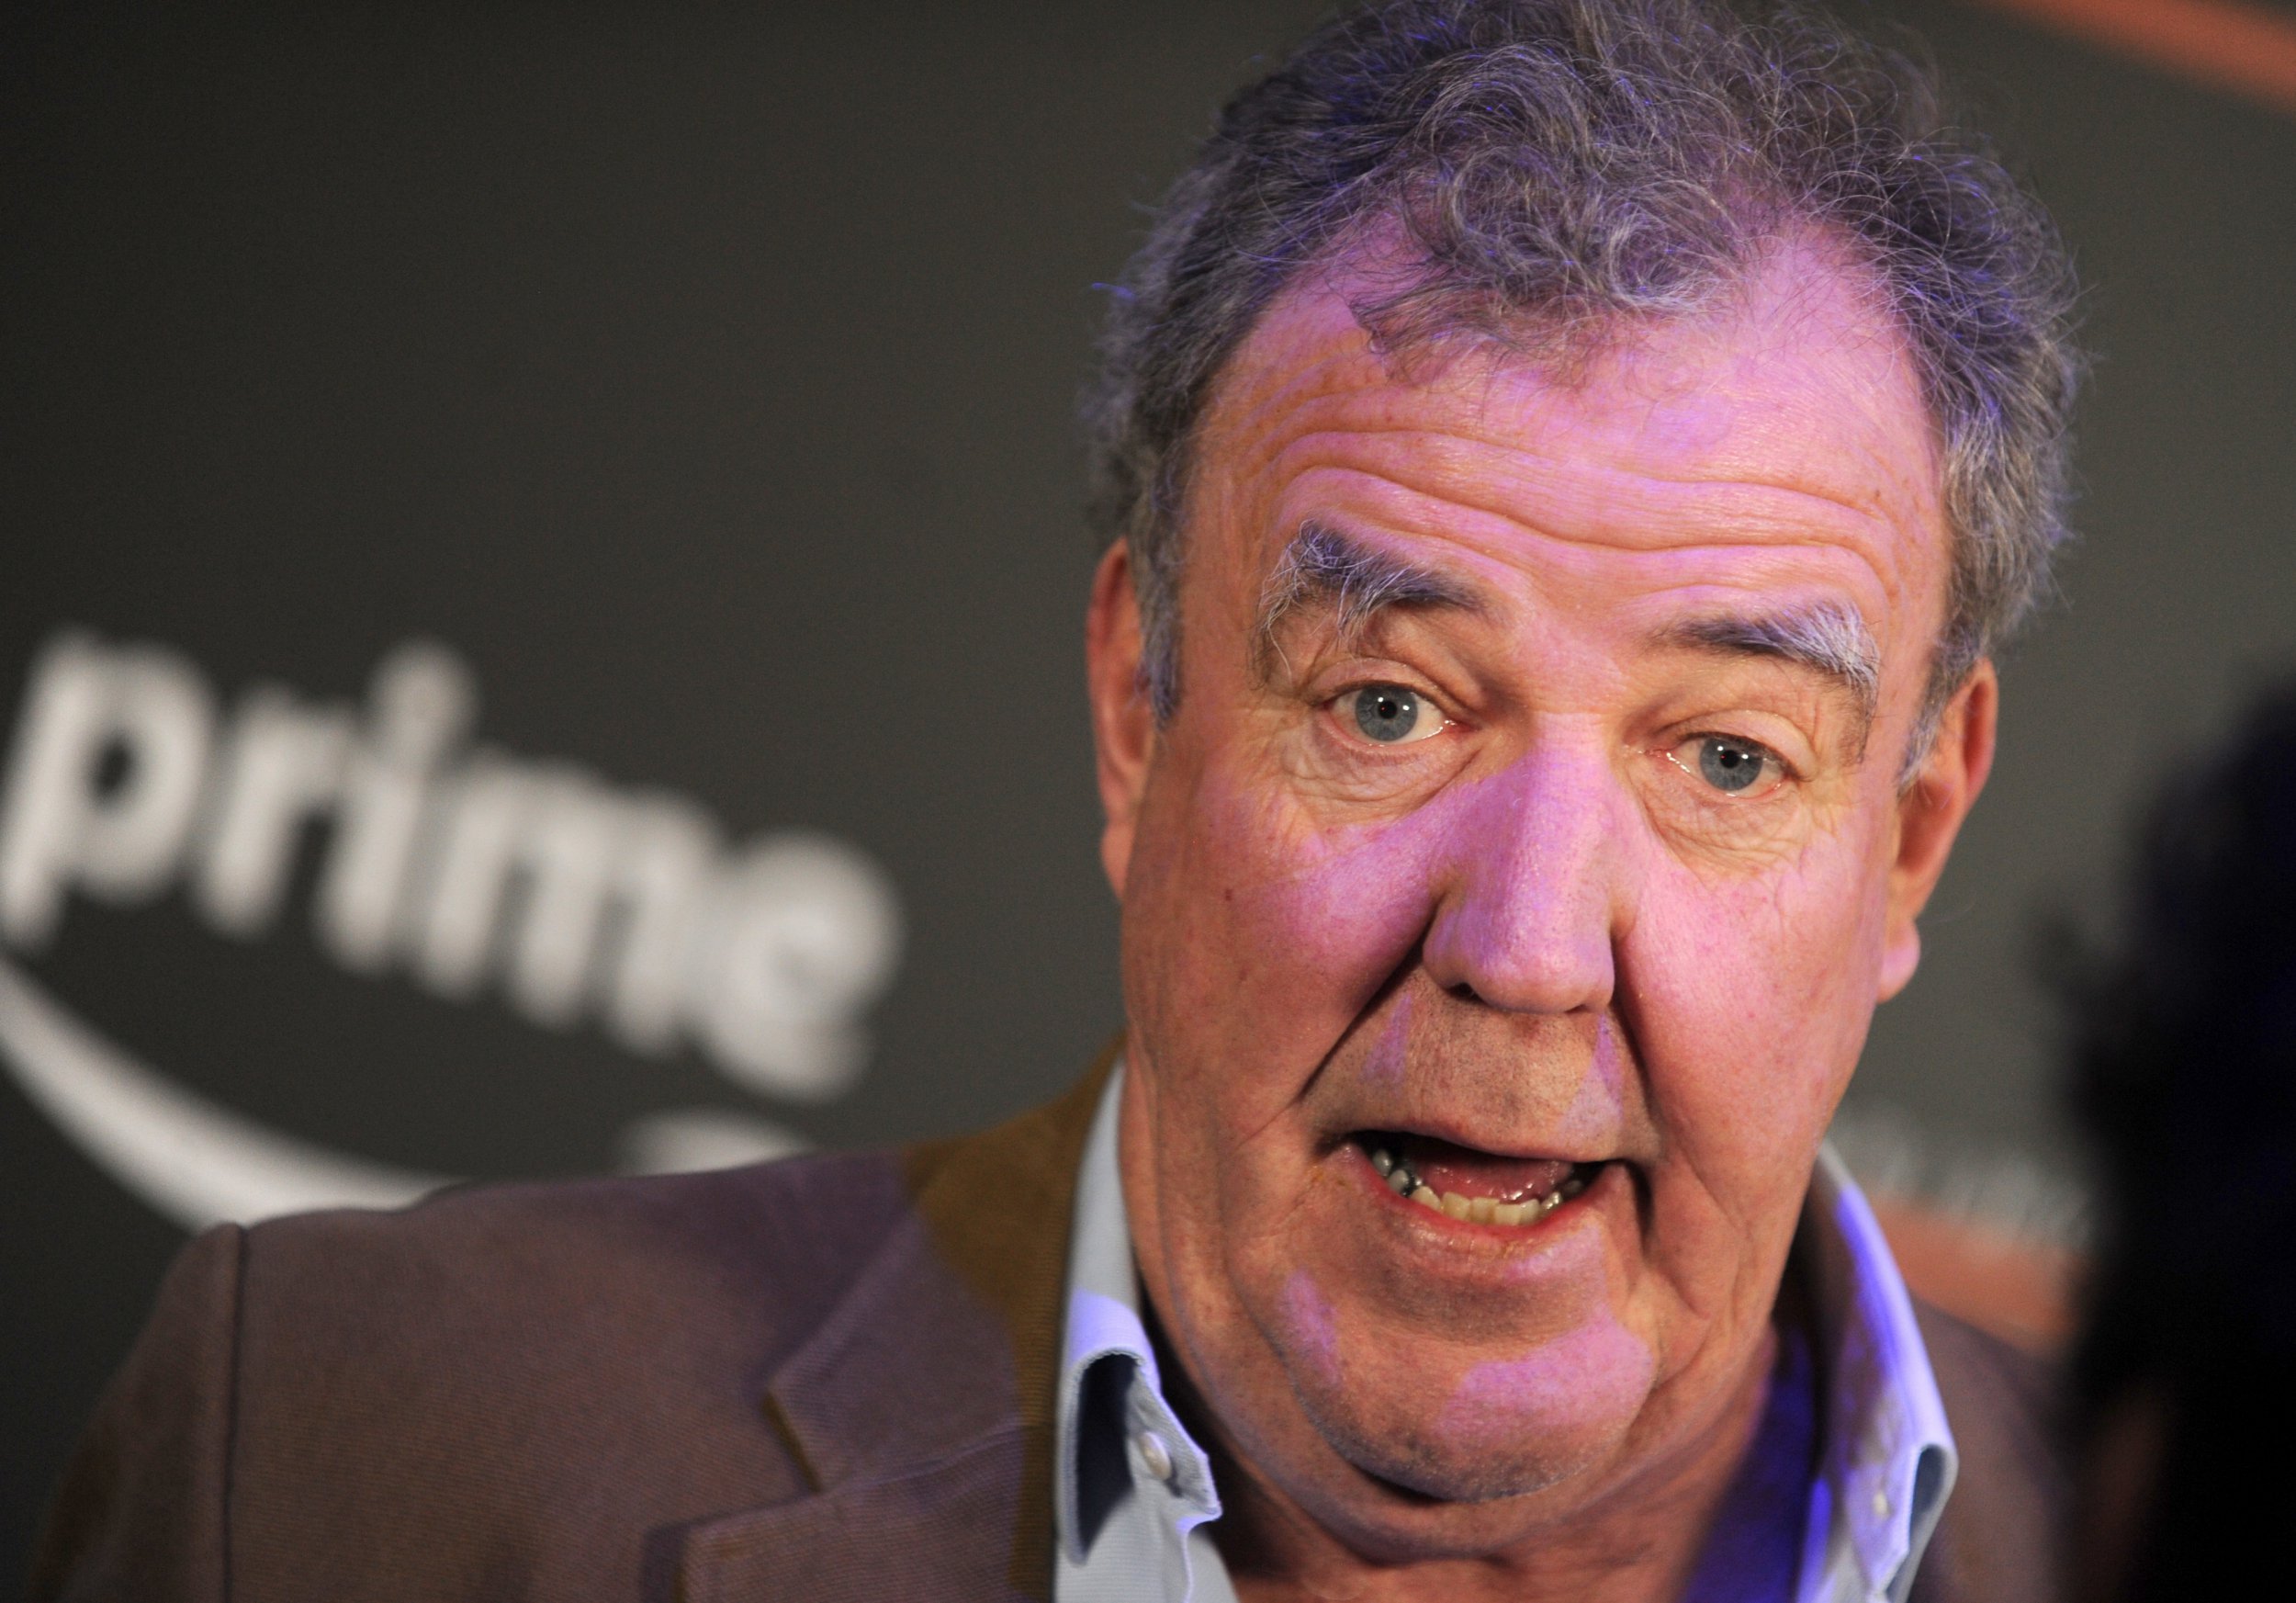 Jeremy Clarkson’s Diddly Squat Farm Shop shuts down for over a month after Meghan controversy